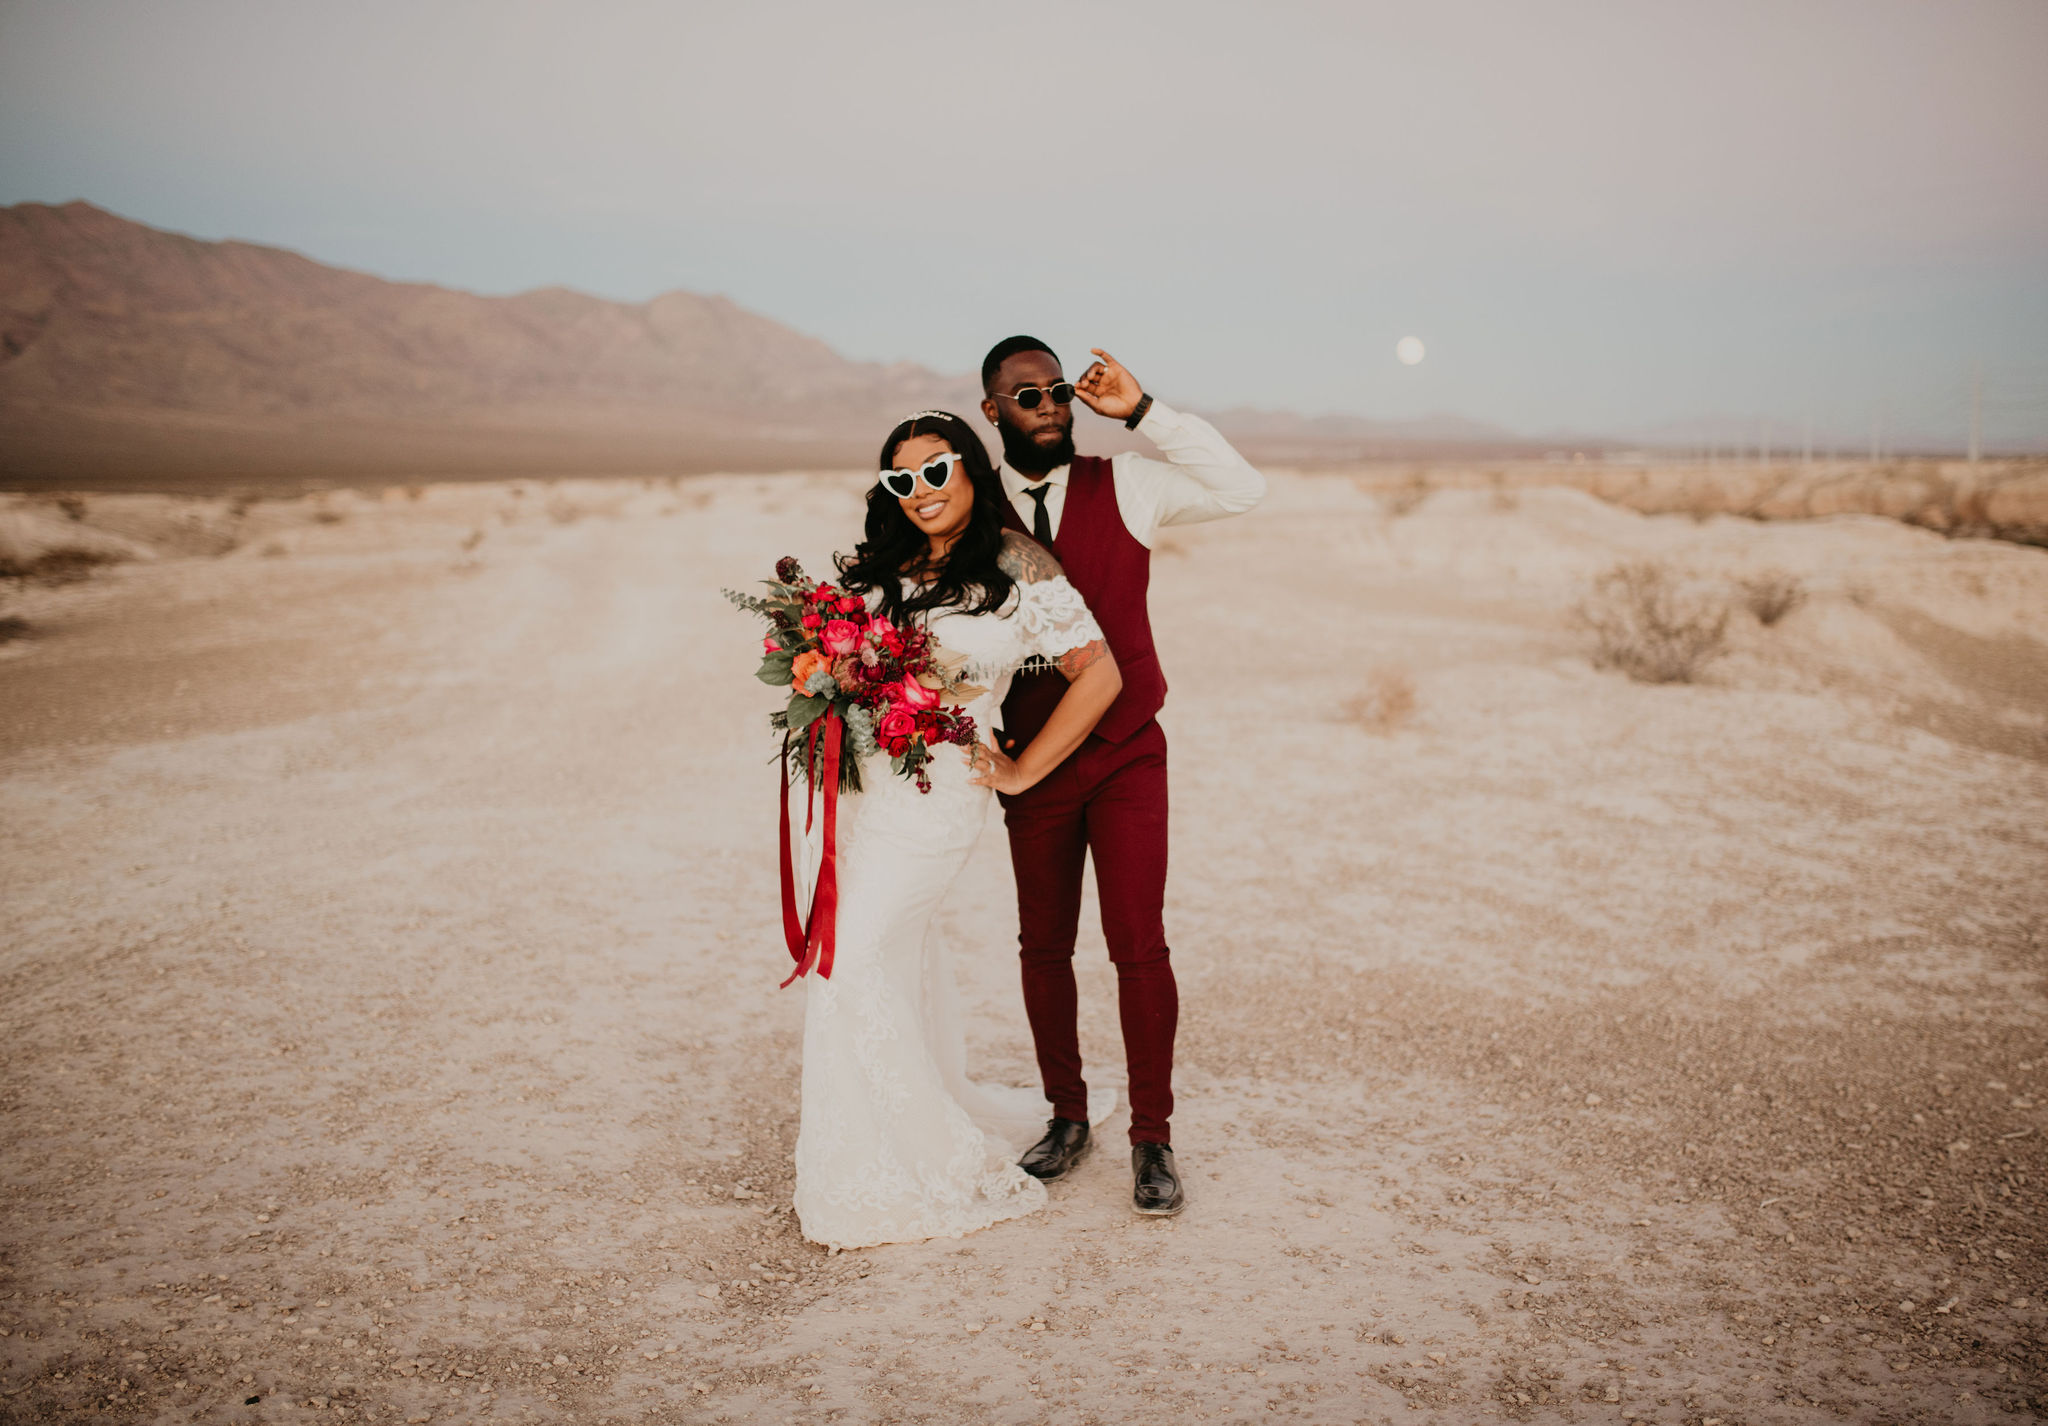 Couple in Sunglasses in Desert after Las Vegas Ceremony 